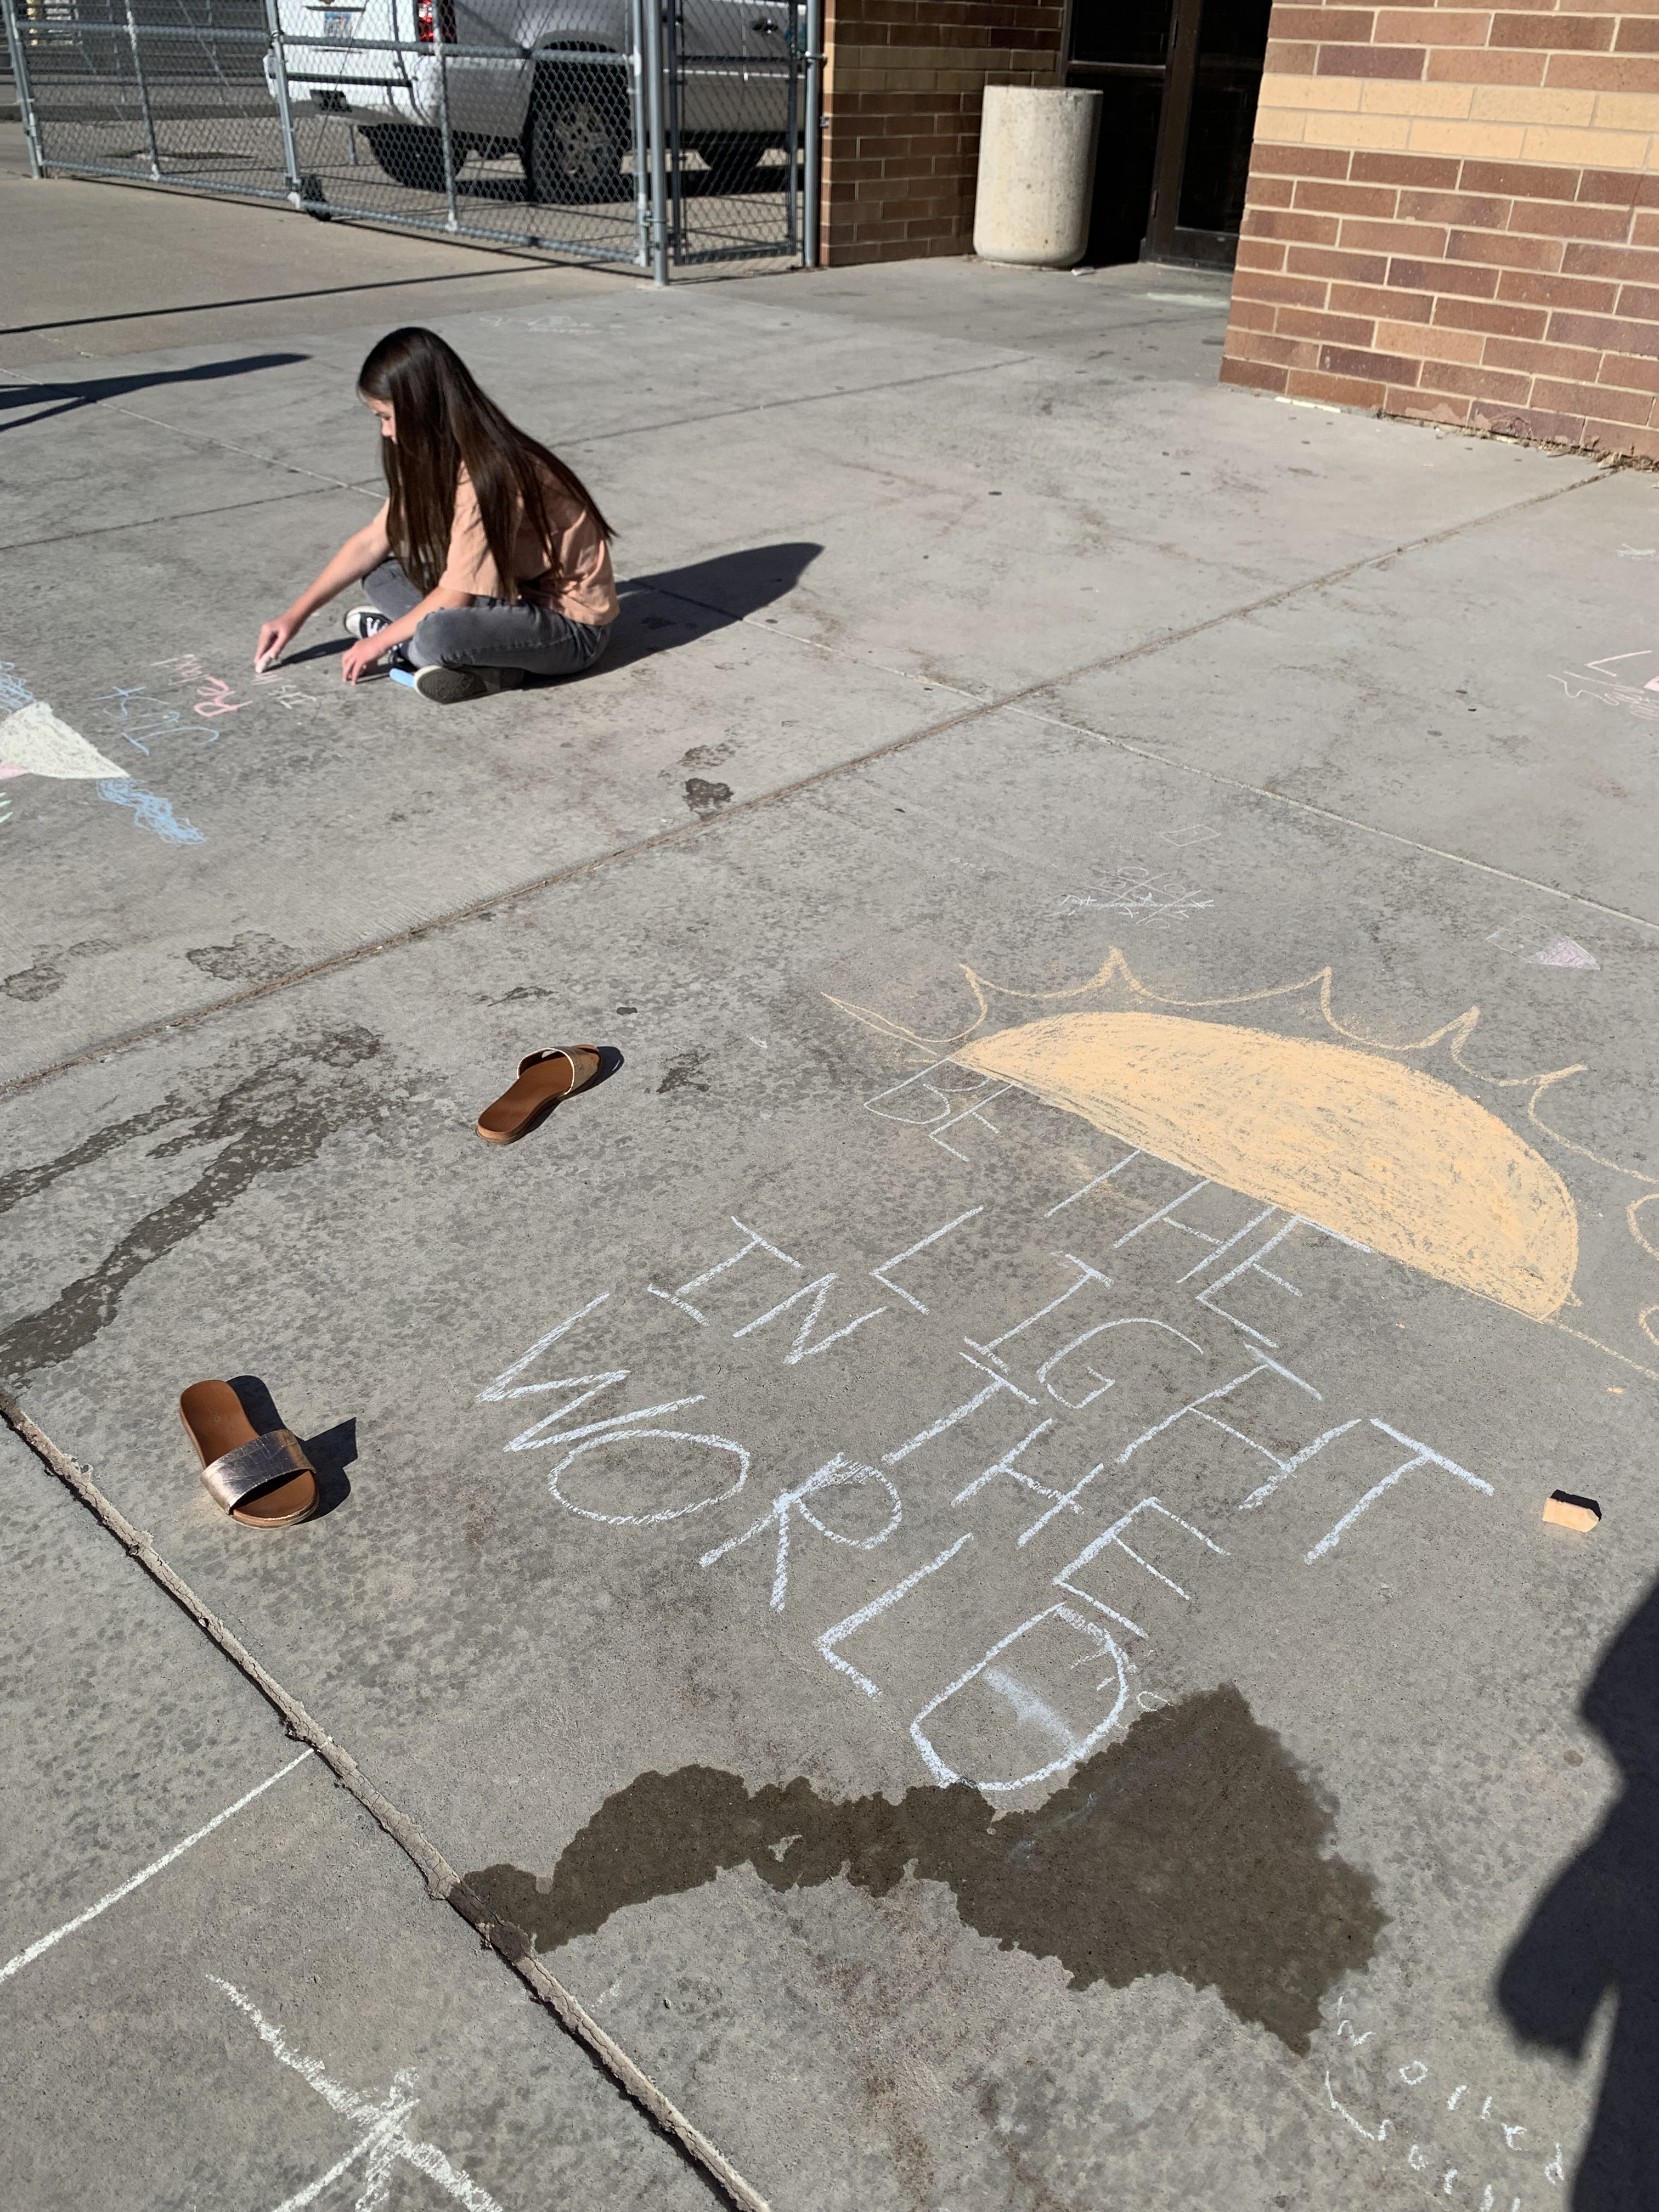 Students writing with chalk on the sidewalks